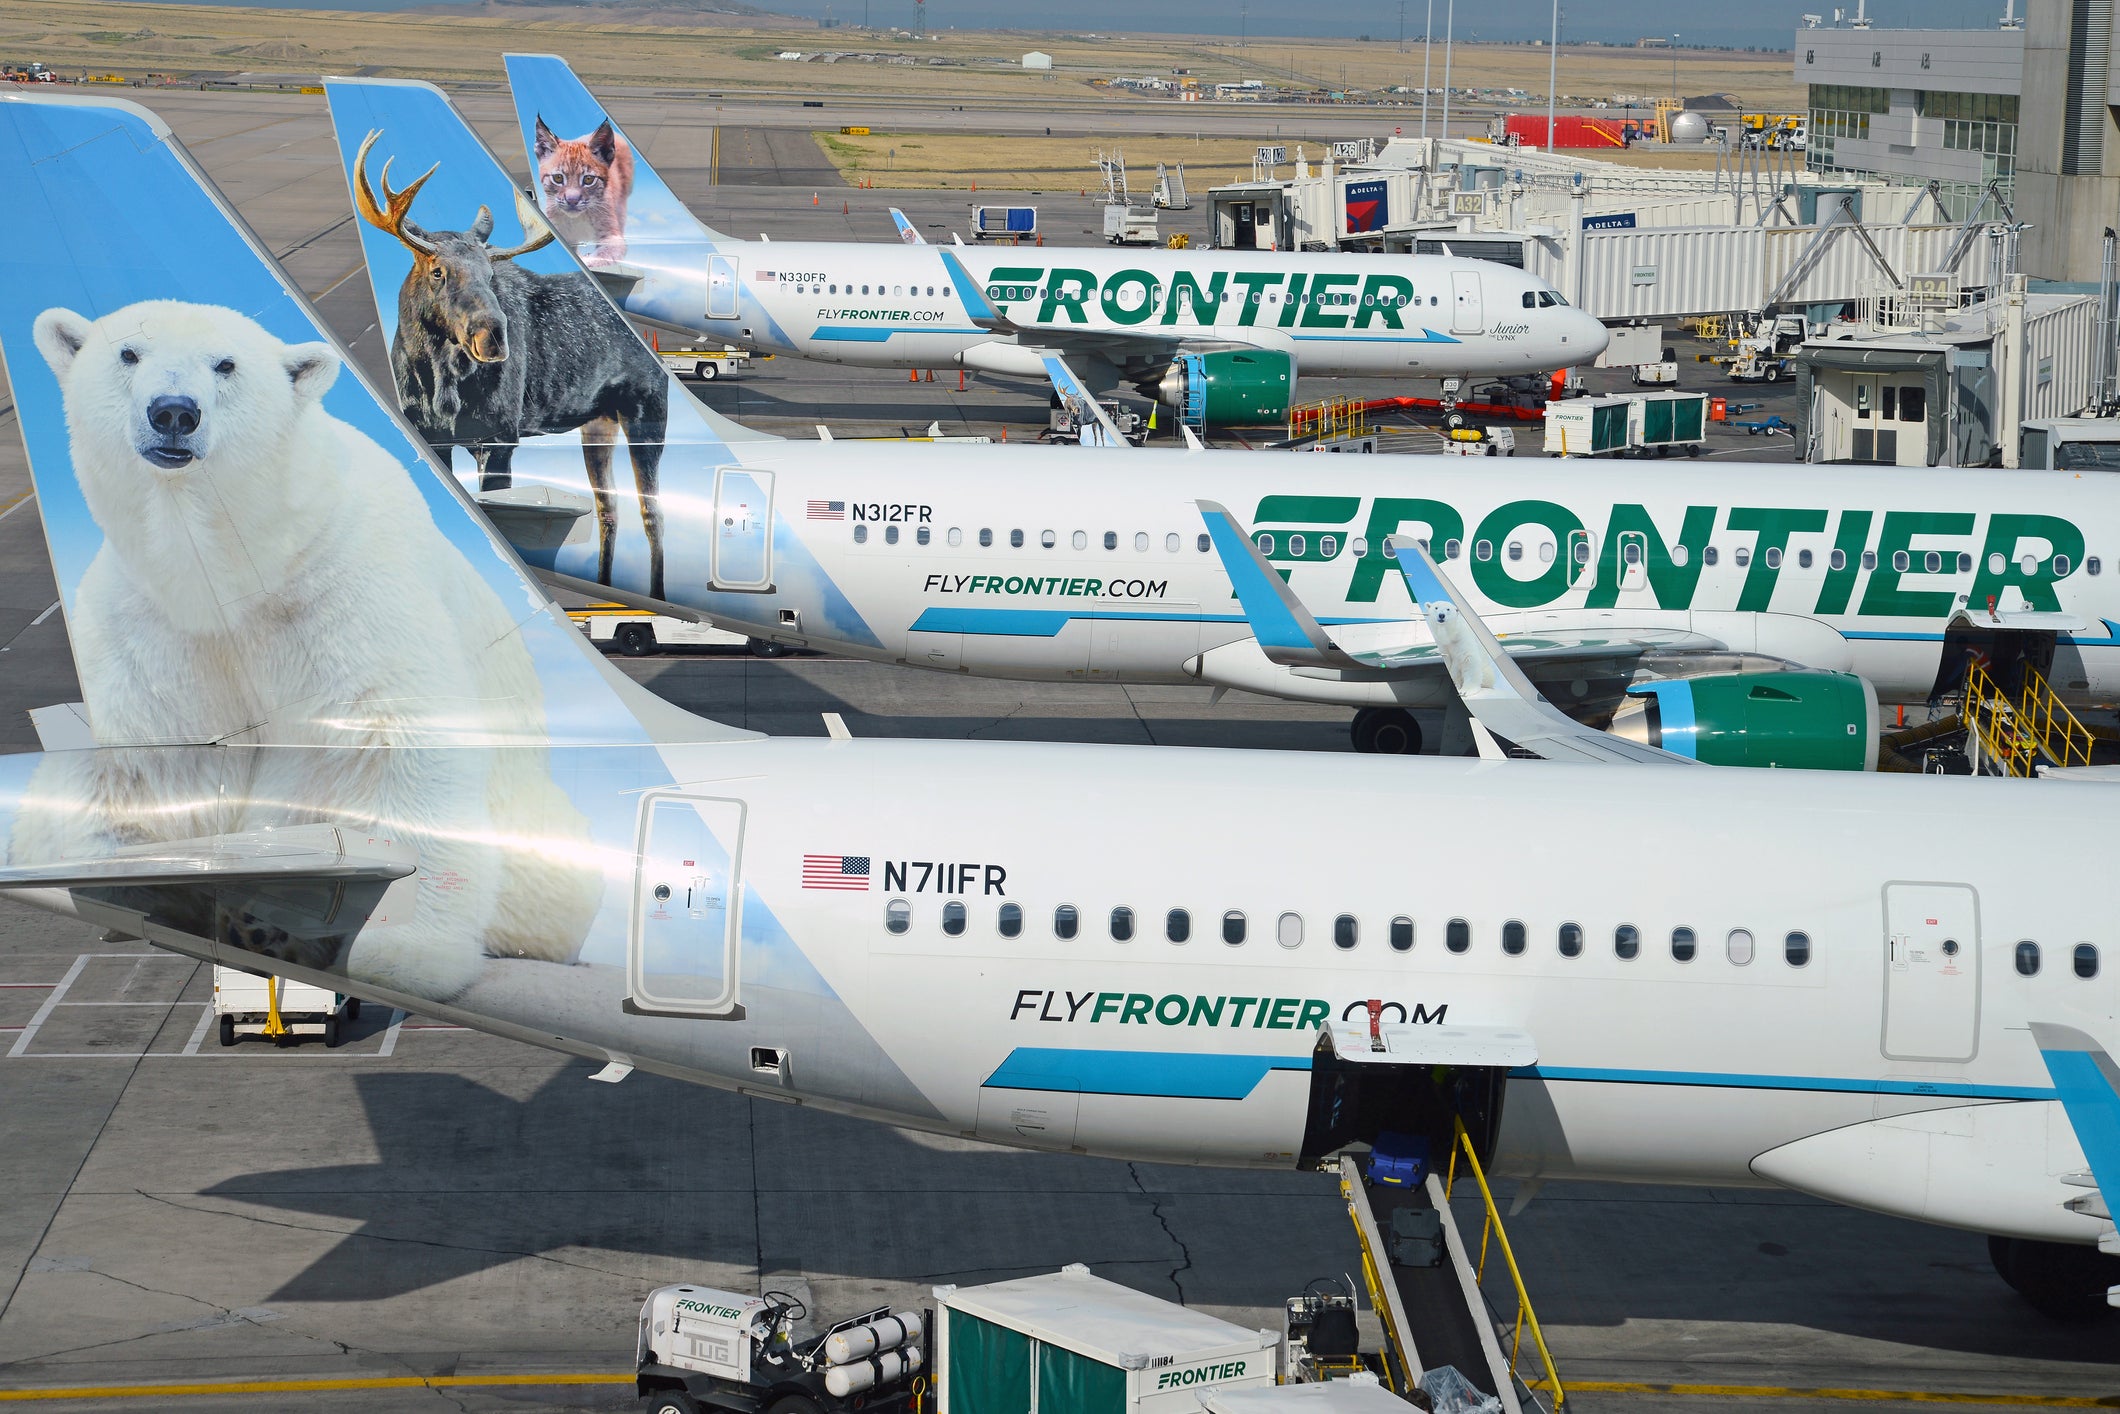 Frontier Airlines with aircraft at gate, while characterized as a low cost carrier, Frontier continues to expand with new routes in the United States.